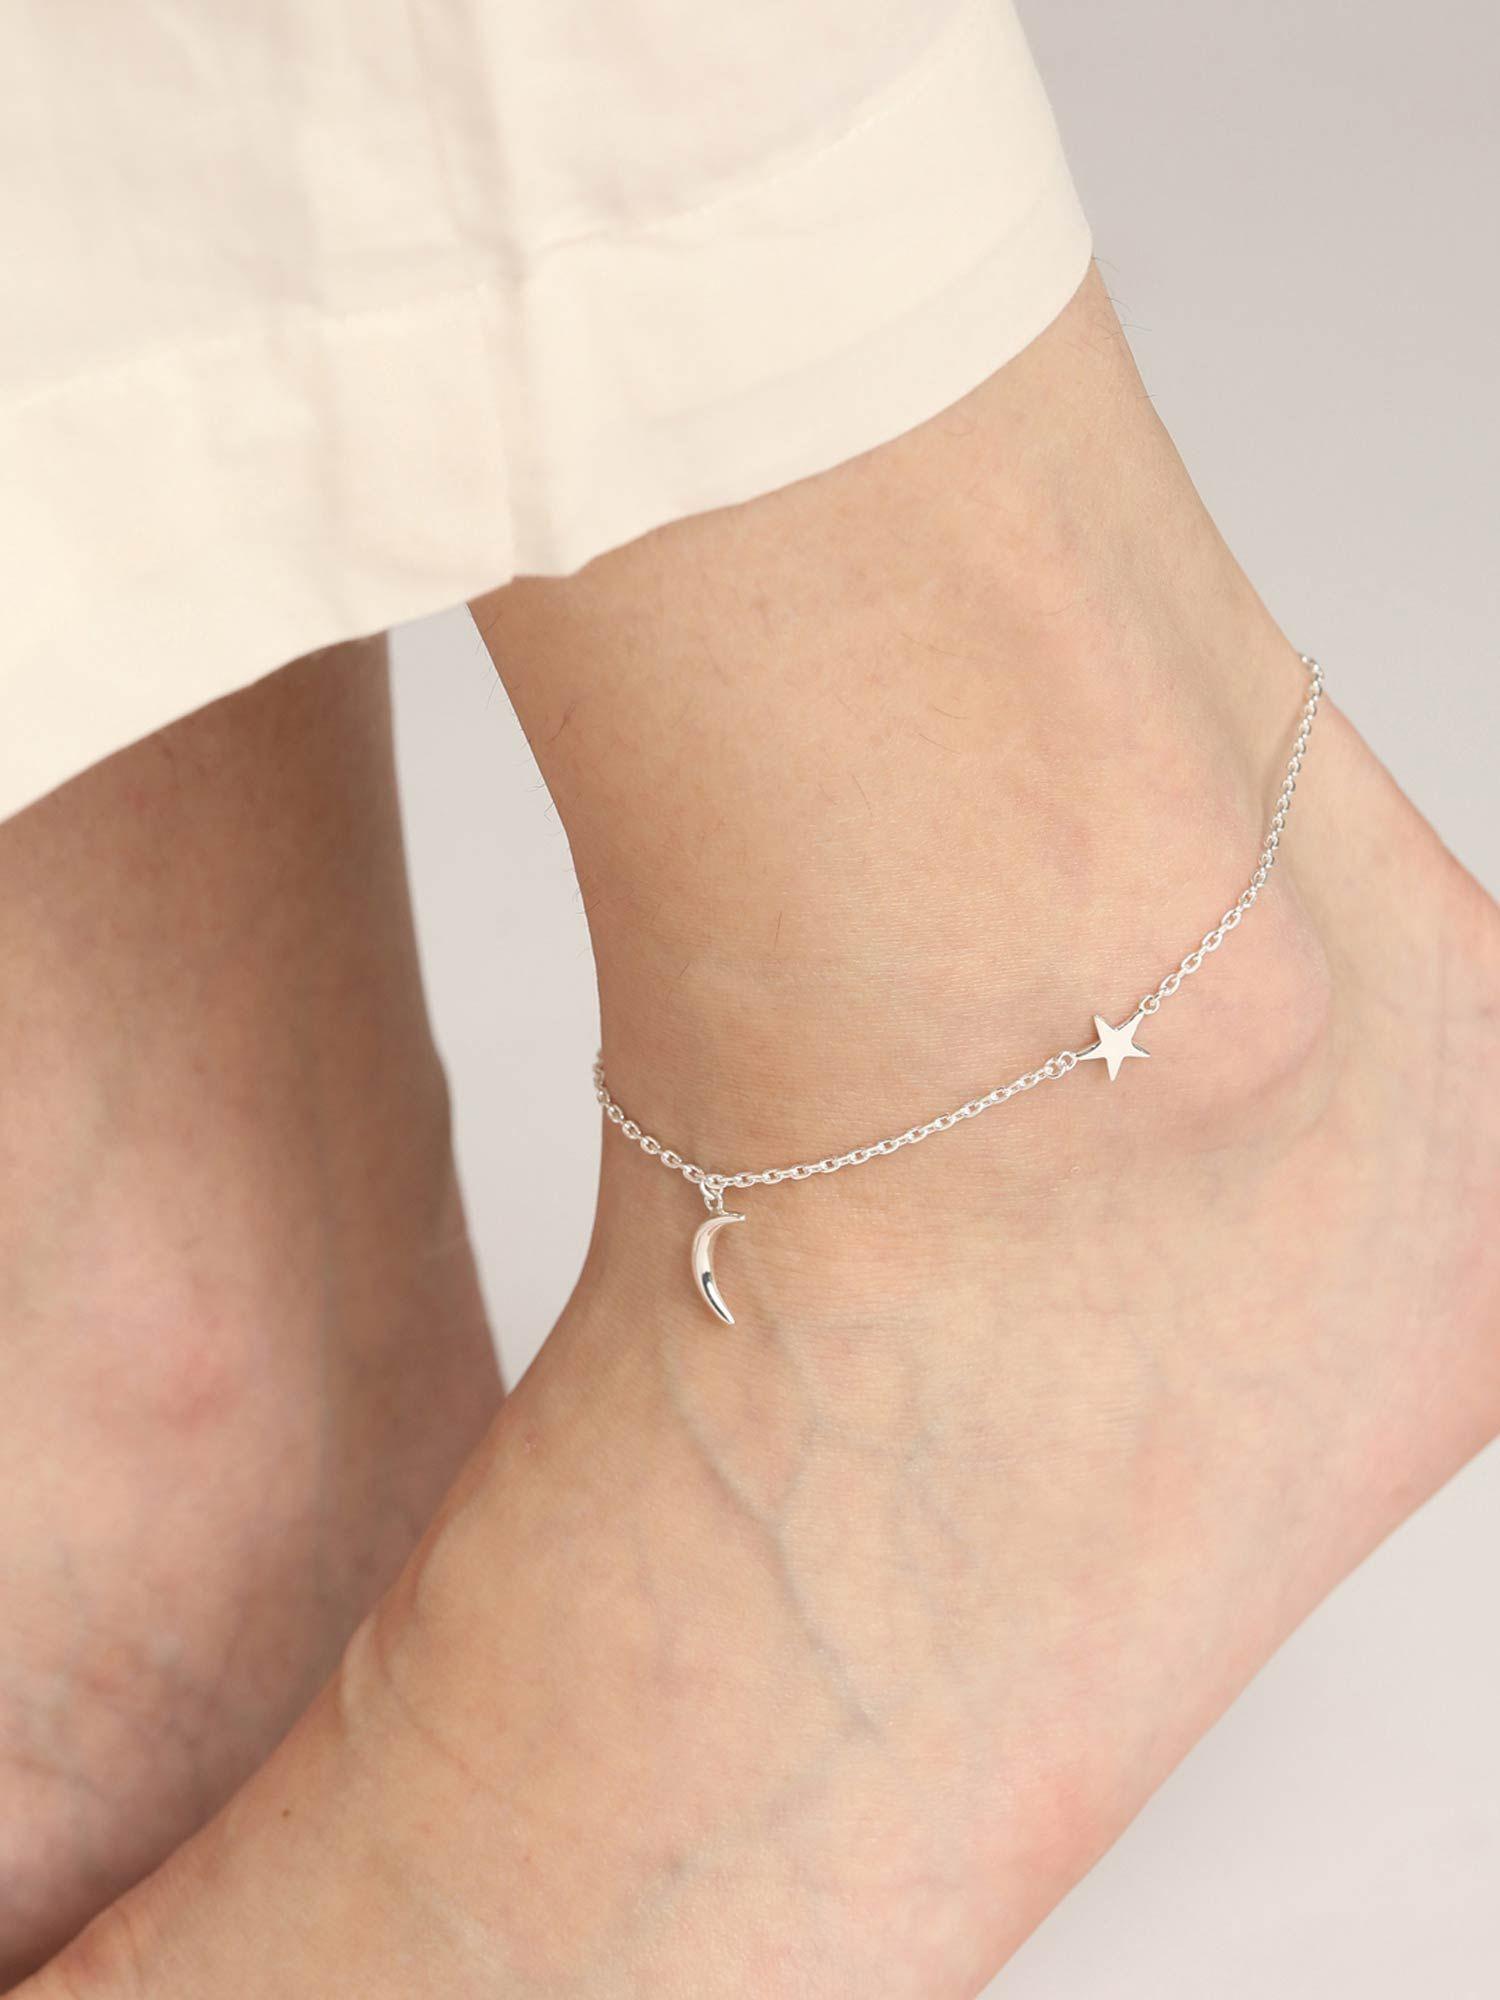 925-sterling-silver-minimal-adjustable-chain-anklet-payal-single-for-women-and-girls